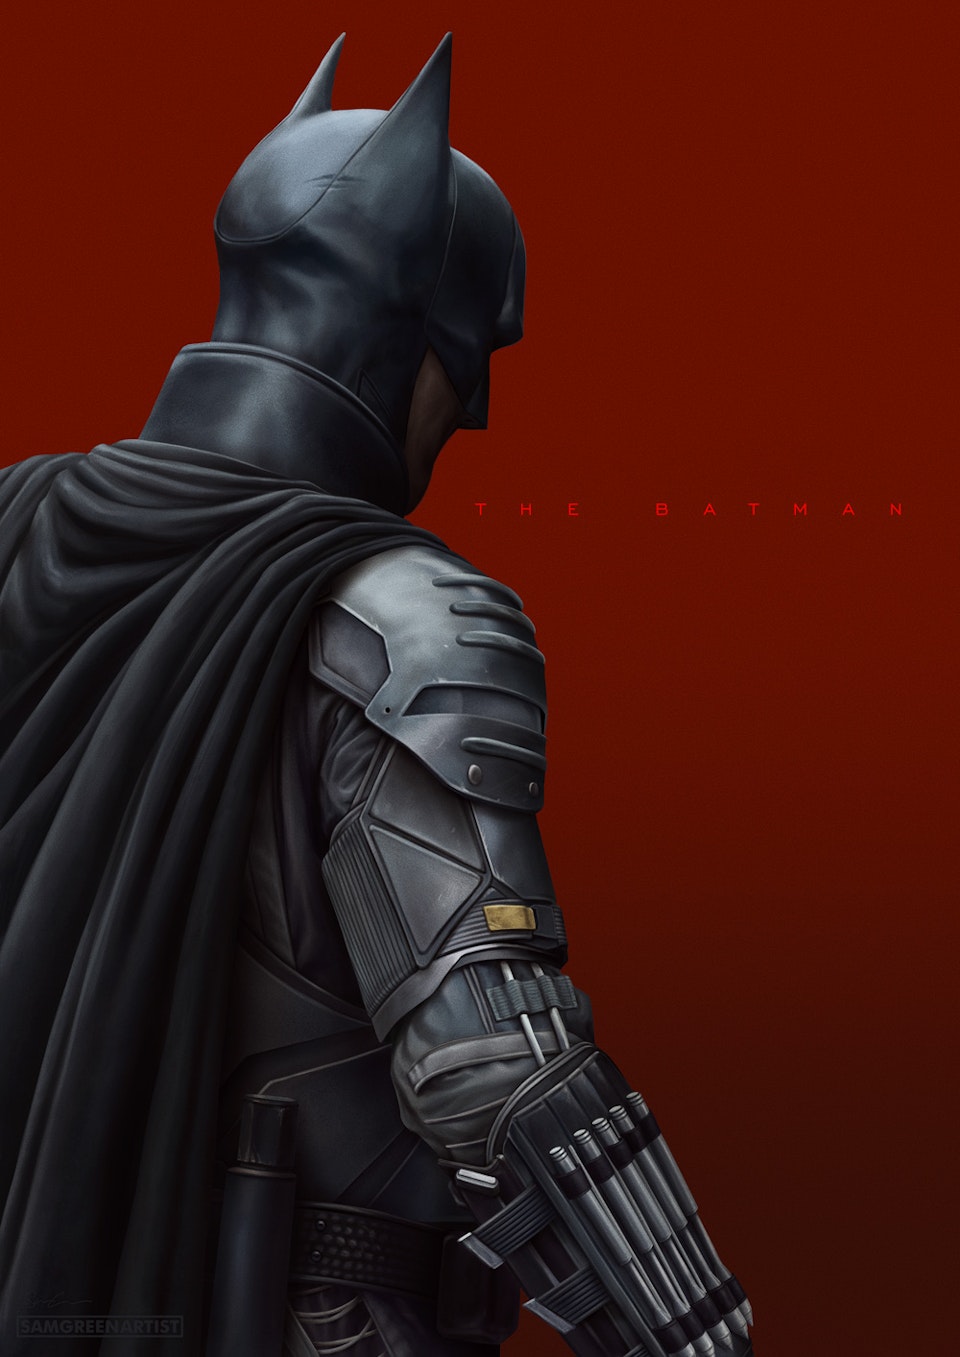 The Batman - Fan Art - The Batman - Illustration - Alternate version (2021)

An earlier version of the piece, before adding the red tone and general effects.

Painted in Procreate on iPad Pro.